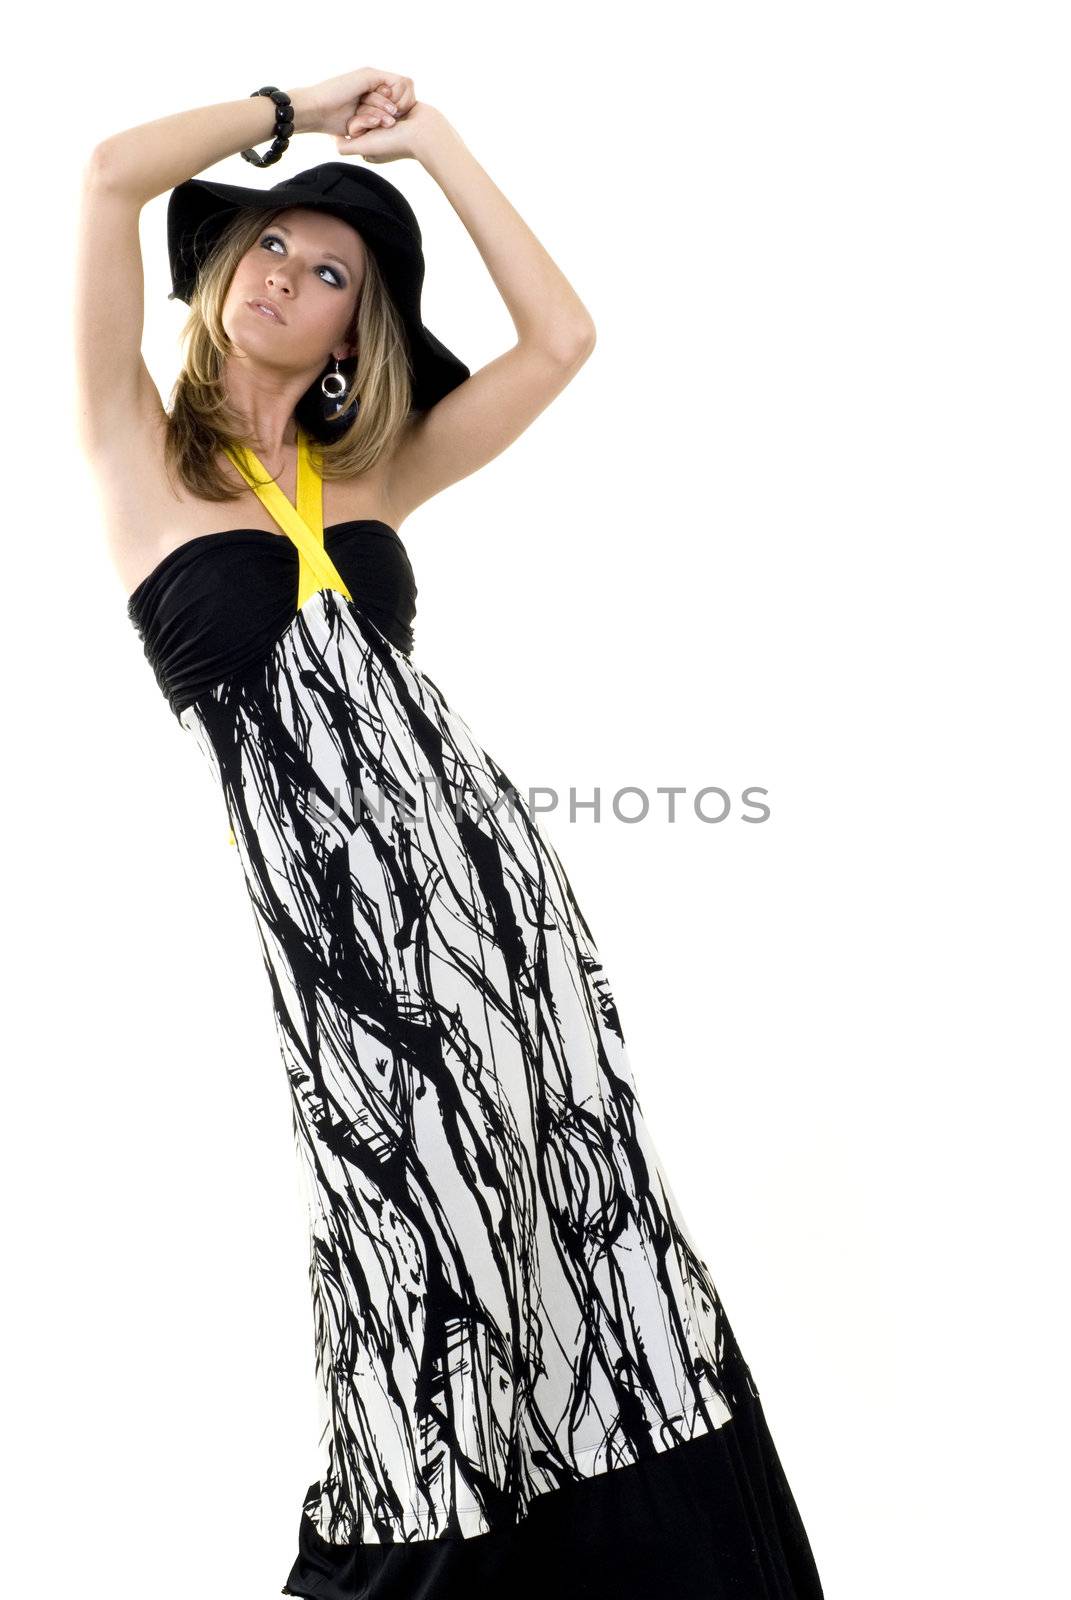 A beautiful model on an isolated white background.